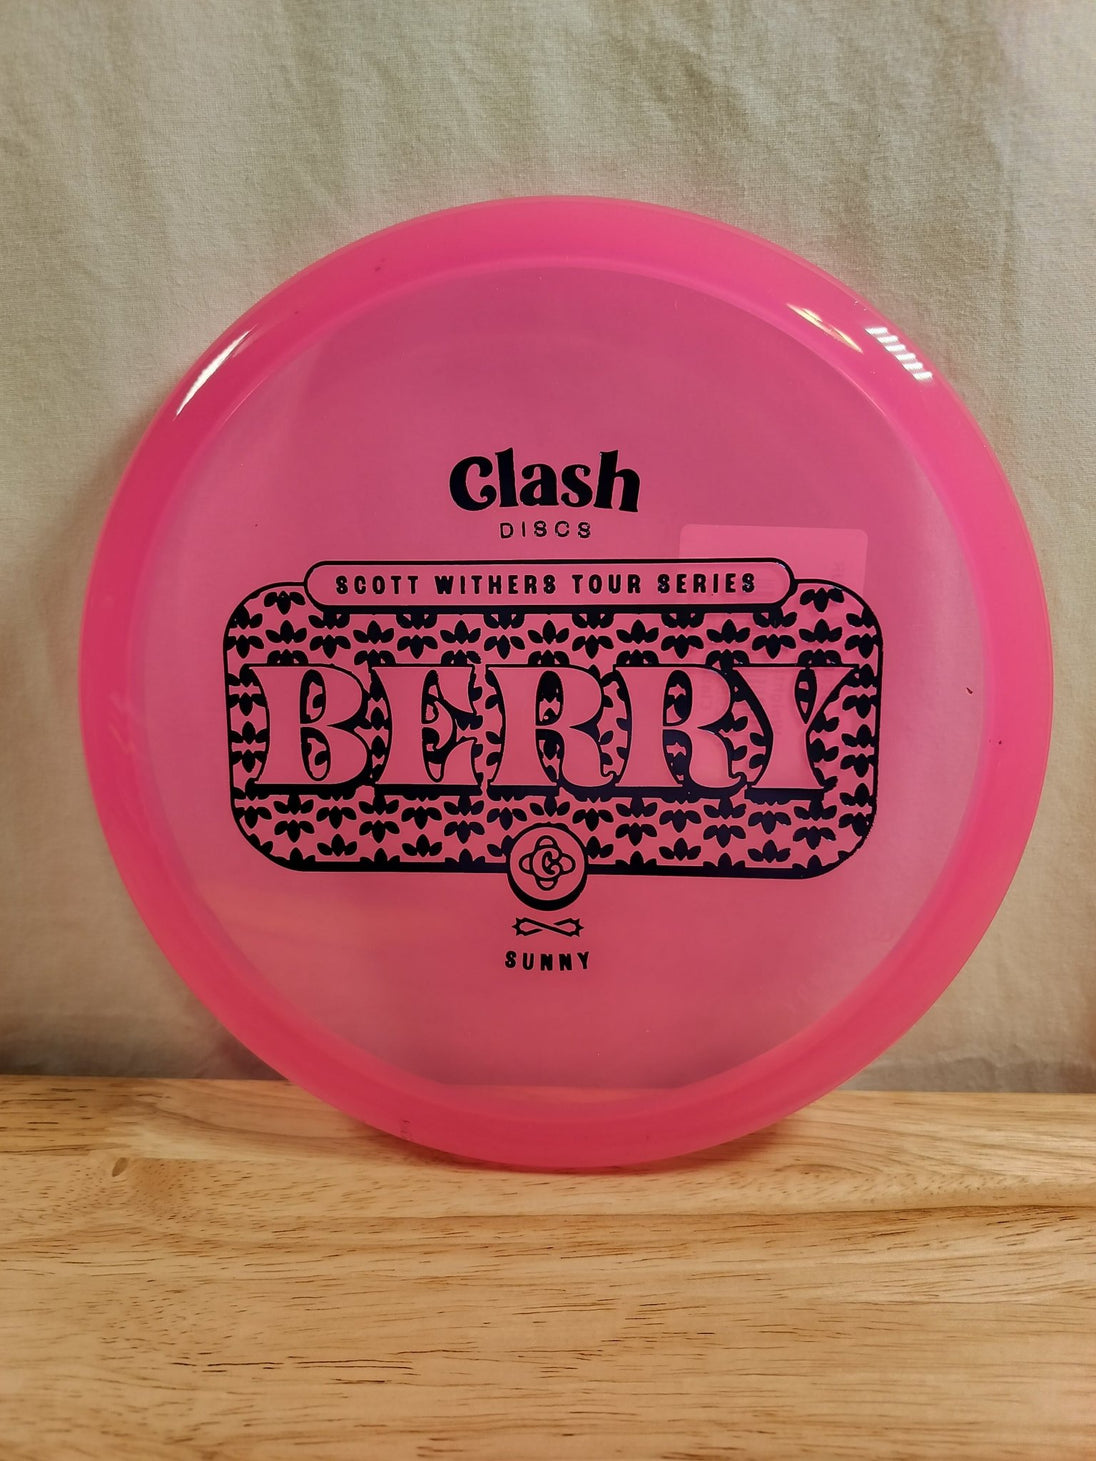 Clash Discs Sunny Berry (Scott Withers Tour Series) - Elemental Disc Golf